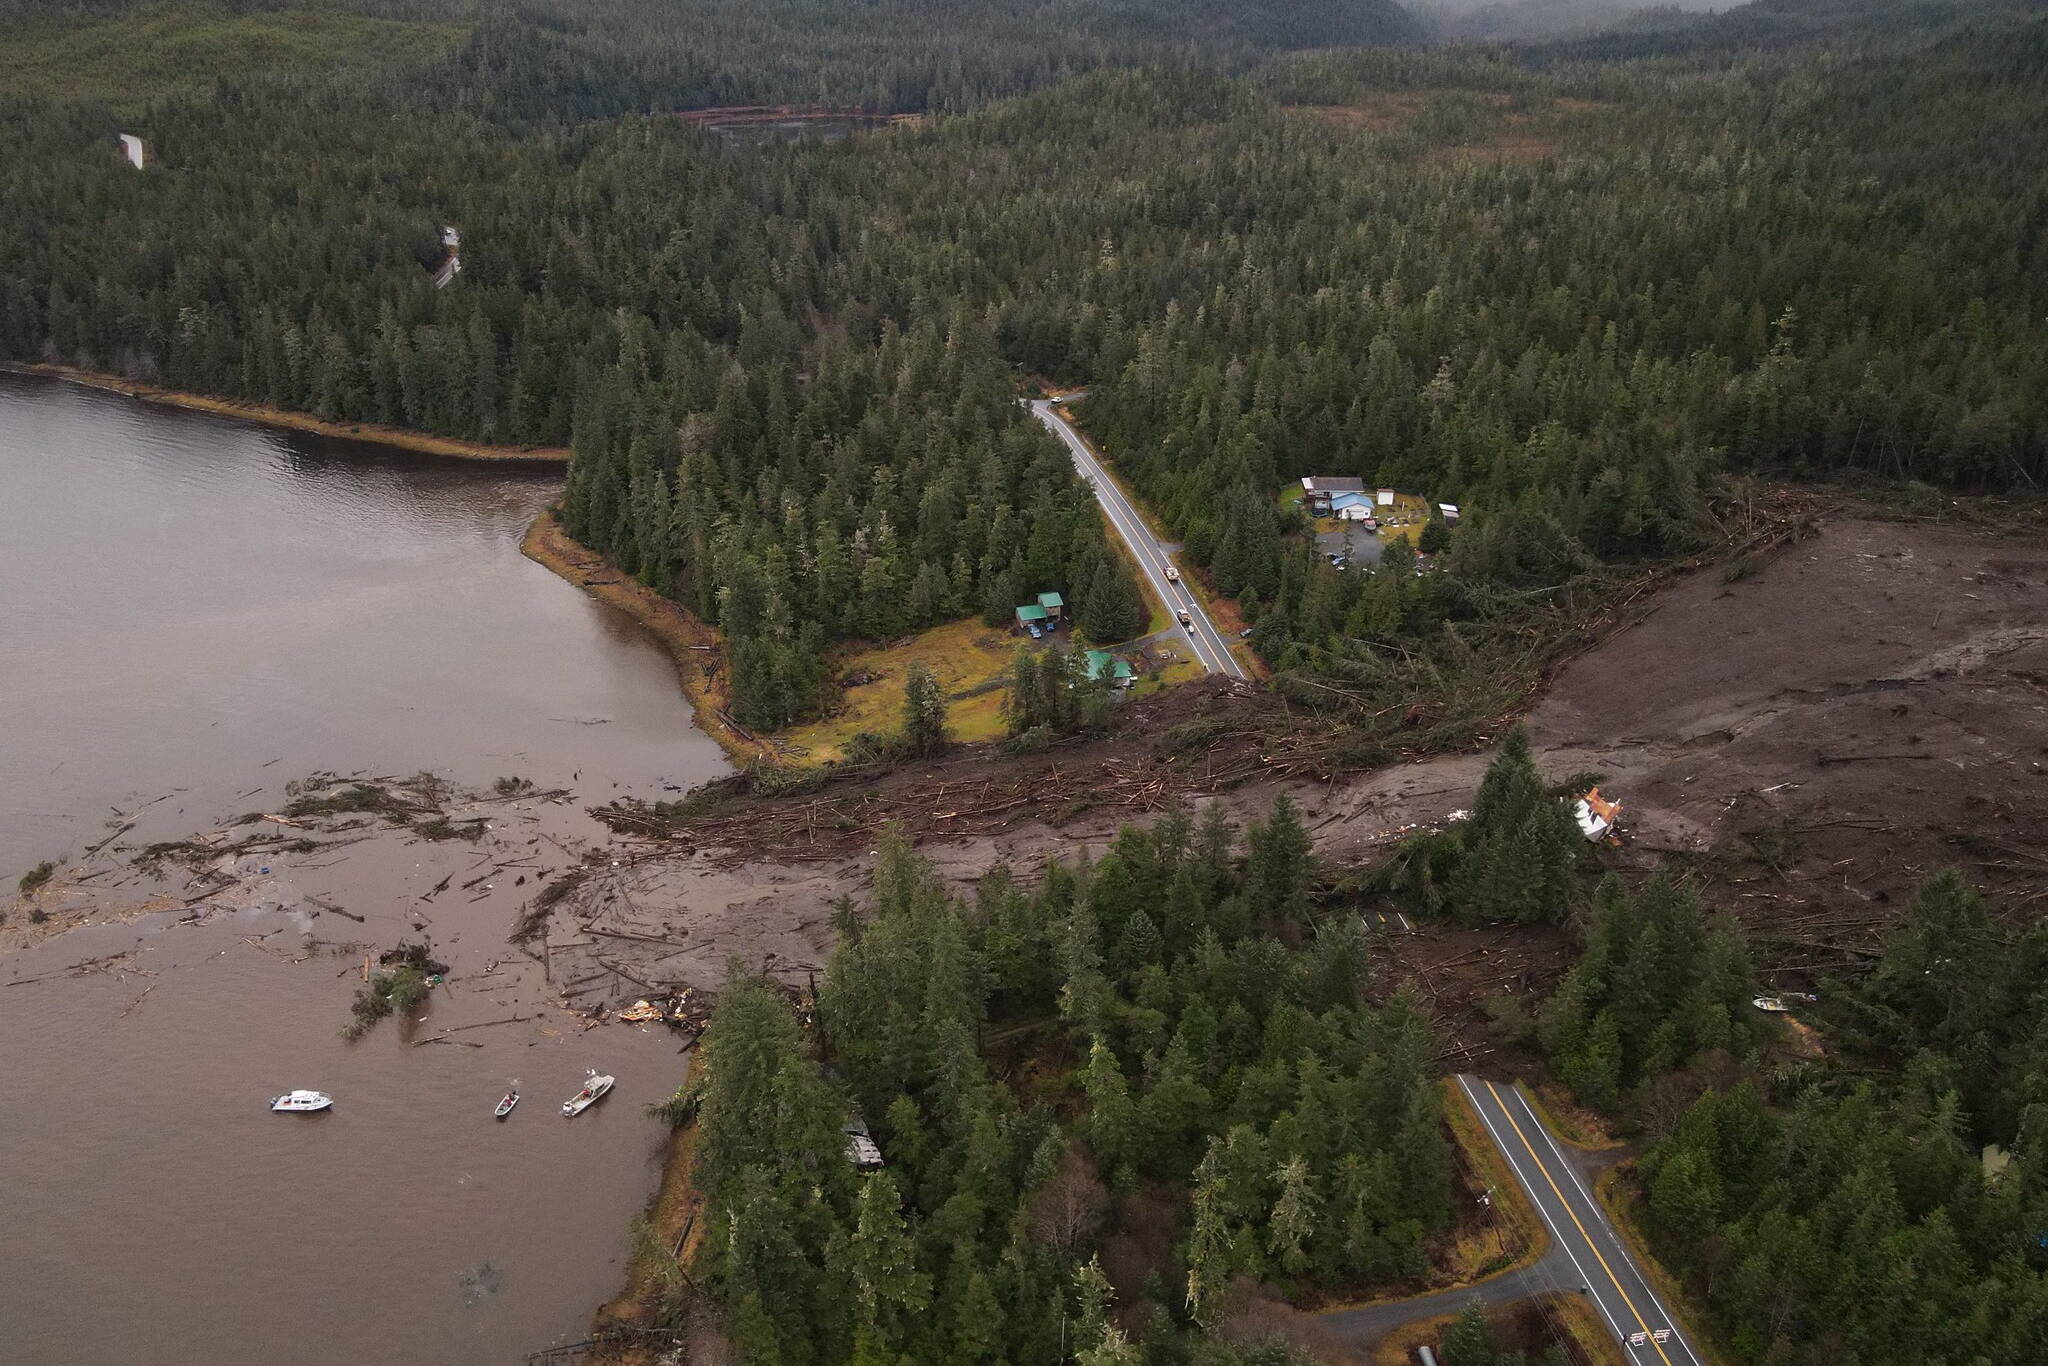 An overhead view of the landslide that struck about 11 miles south of the center of Wrangell, destroying three homes and leaving six people dead or missing. (Photo courtesy of Caleb Purviance via the Alaska Department of Transportation and Public Facilities)